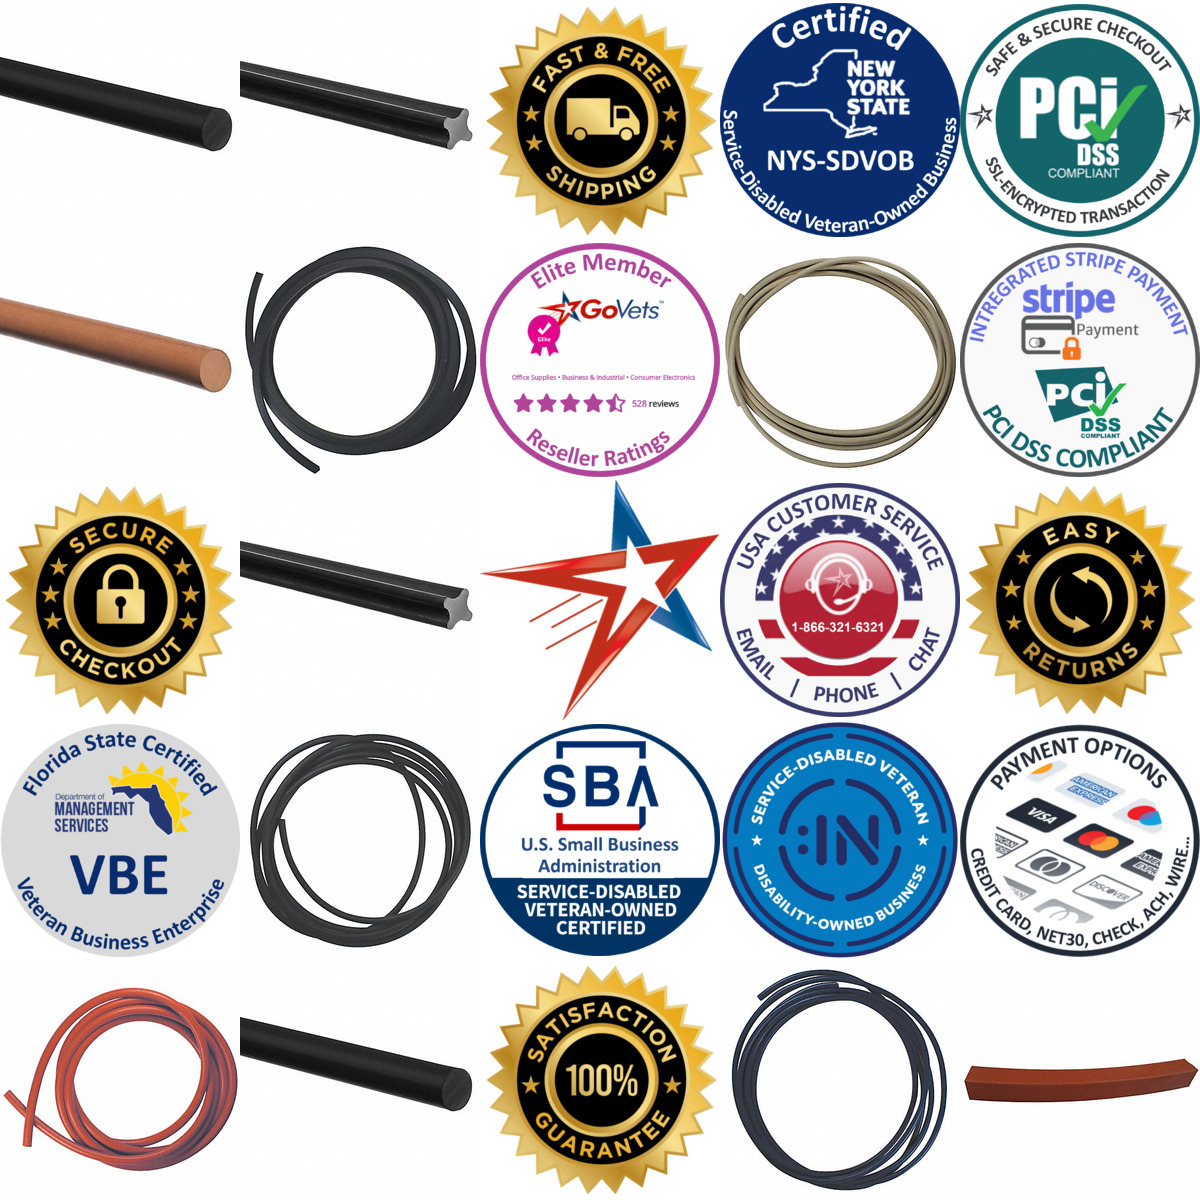 A selection of Rubber Cord products on GoVets